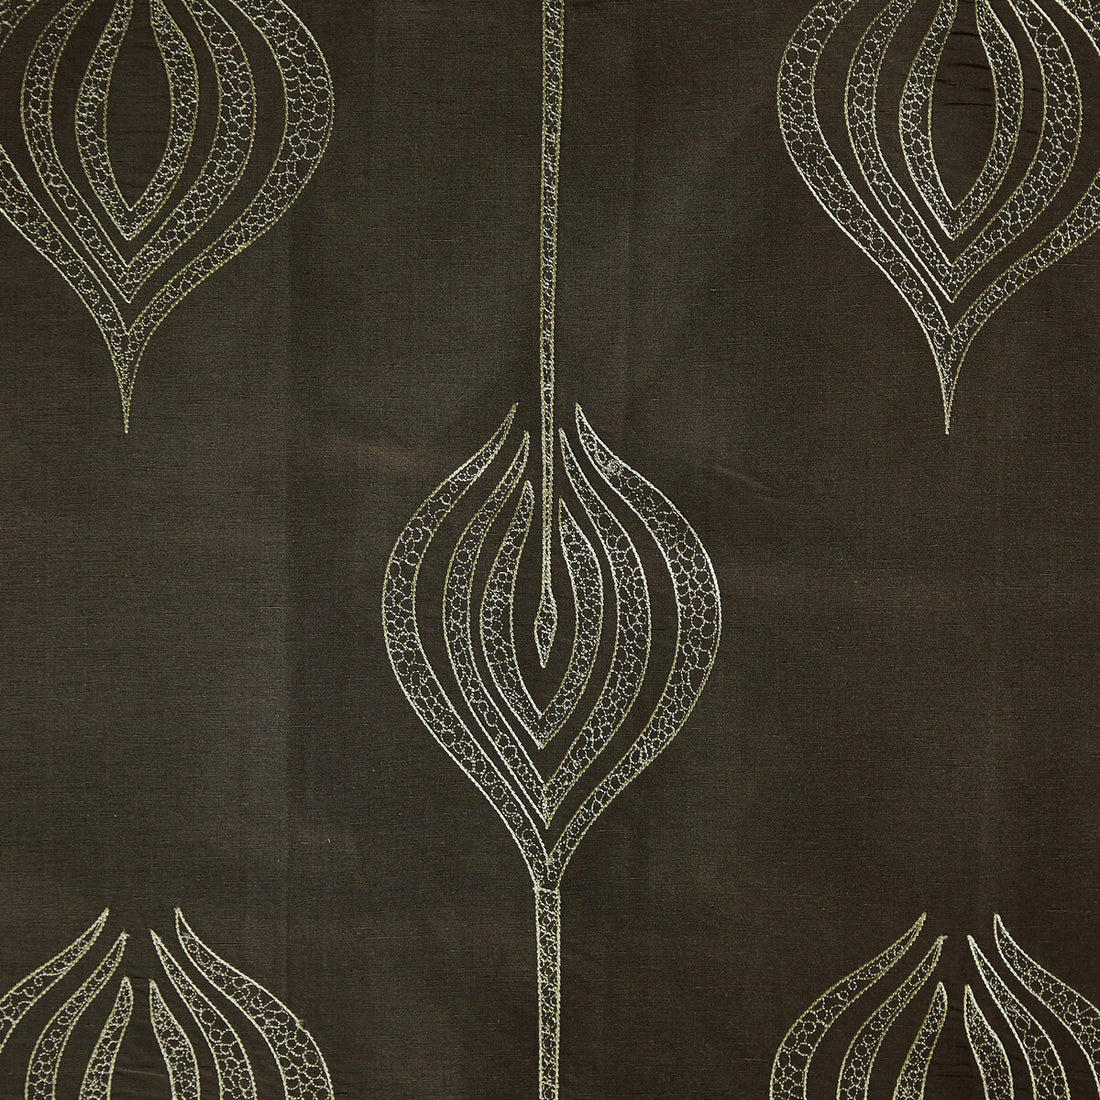 Tulip Embroidery fabric in olive color - pattern GWF-2928.30.0 - by Lee Jofa Modern in the Allegra Hicks II collection